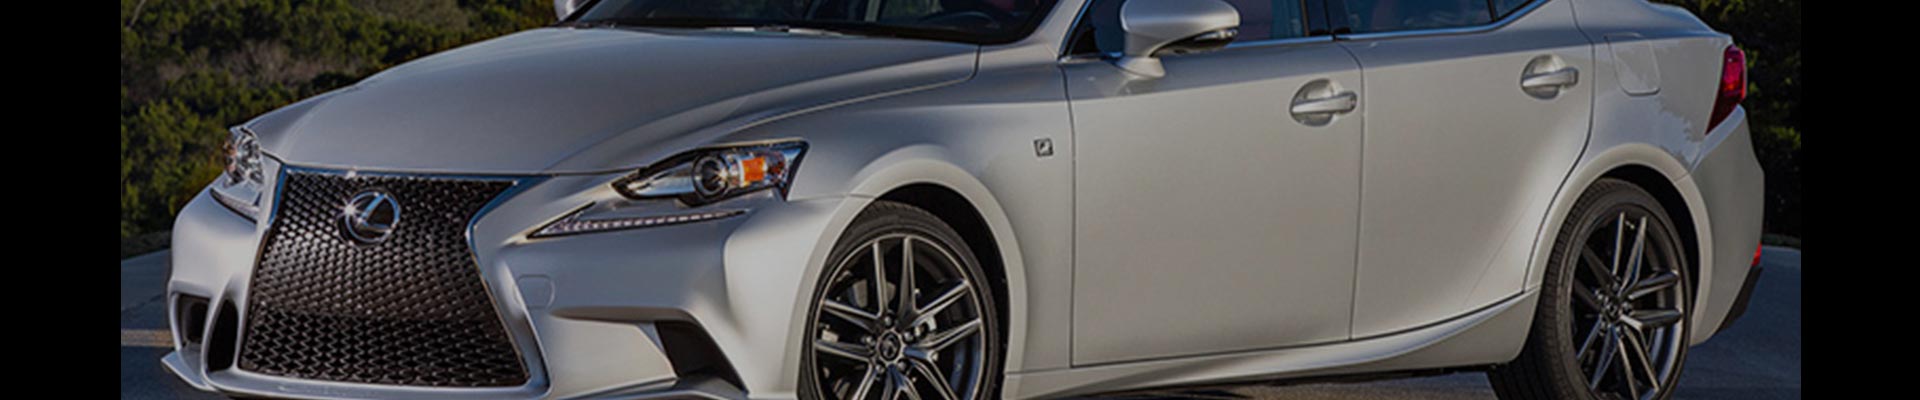 Shop Replacement and OEM 2006 Lexus IS350 Parts with Discounted Price on the Net